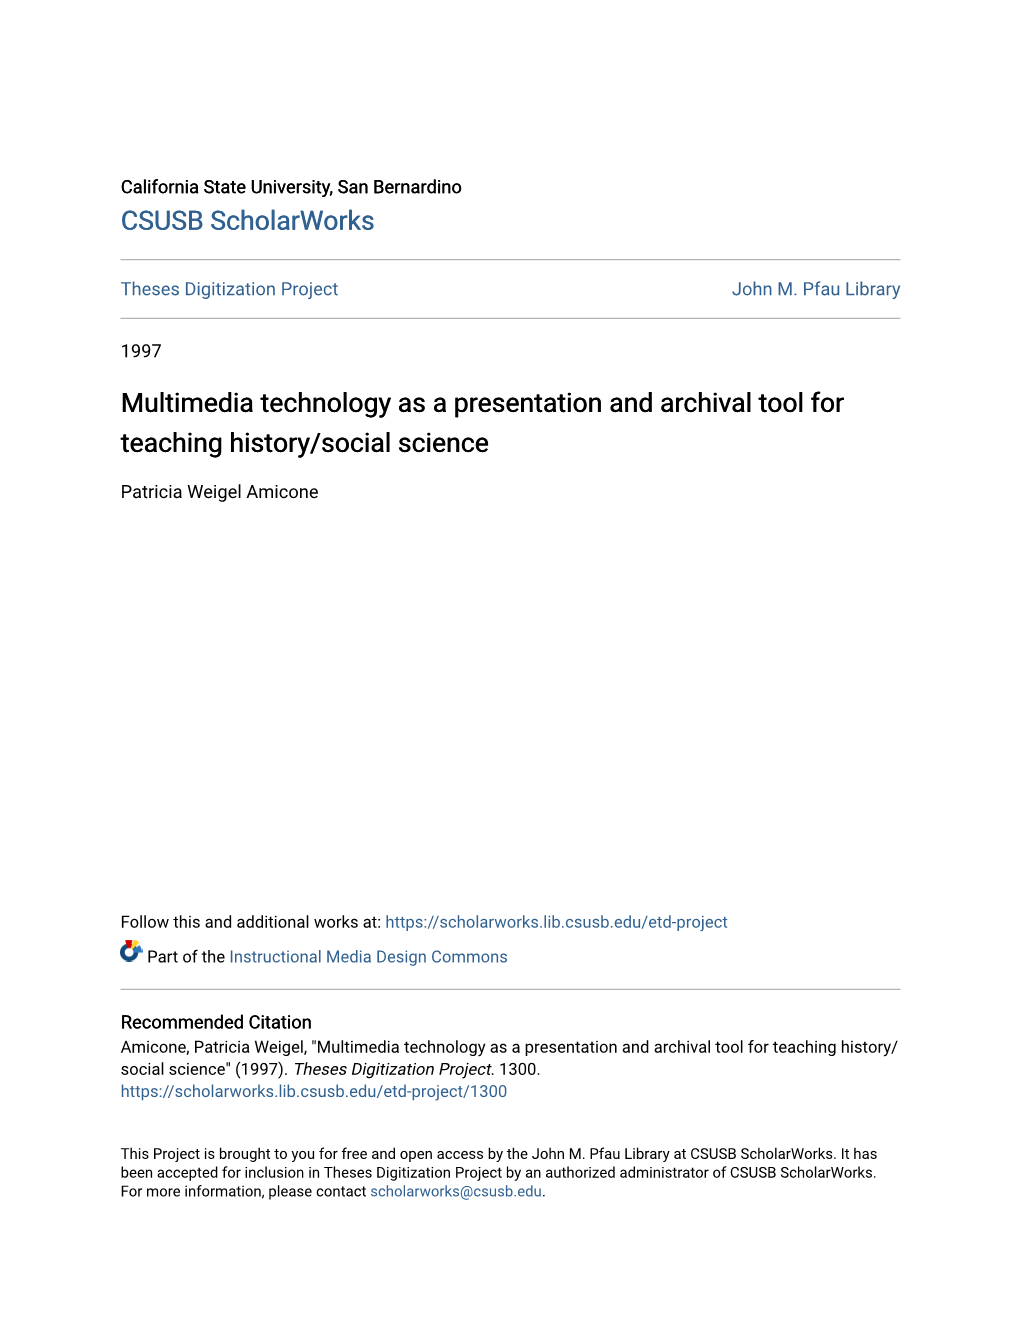 Multimedia Technology As a Presentation and Archival Tool for Teaching History/Social Science